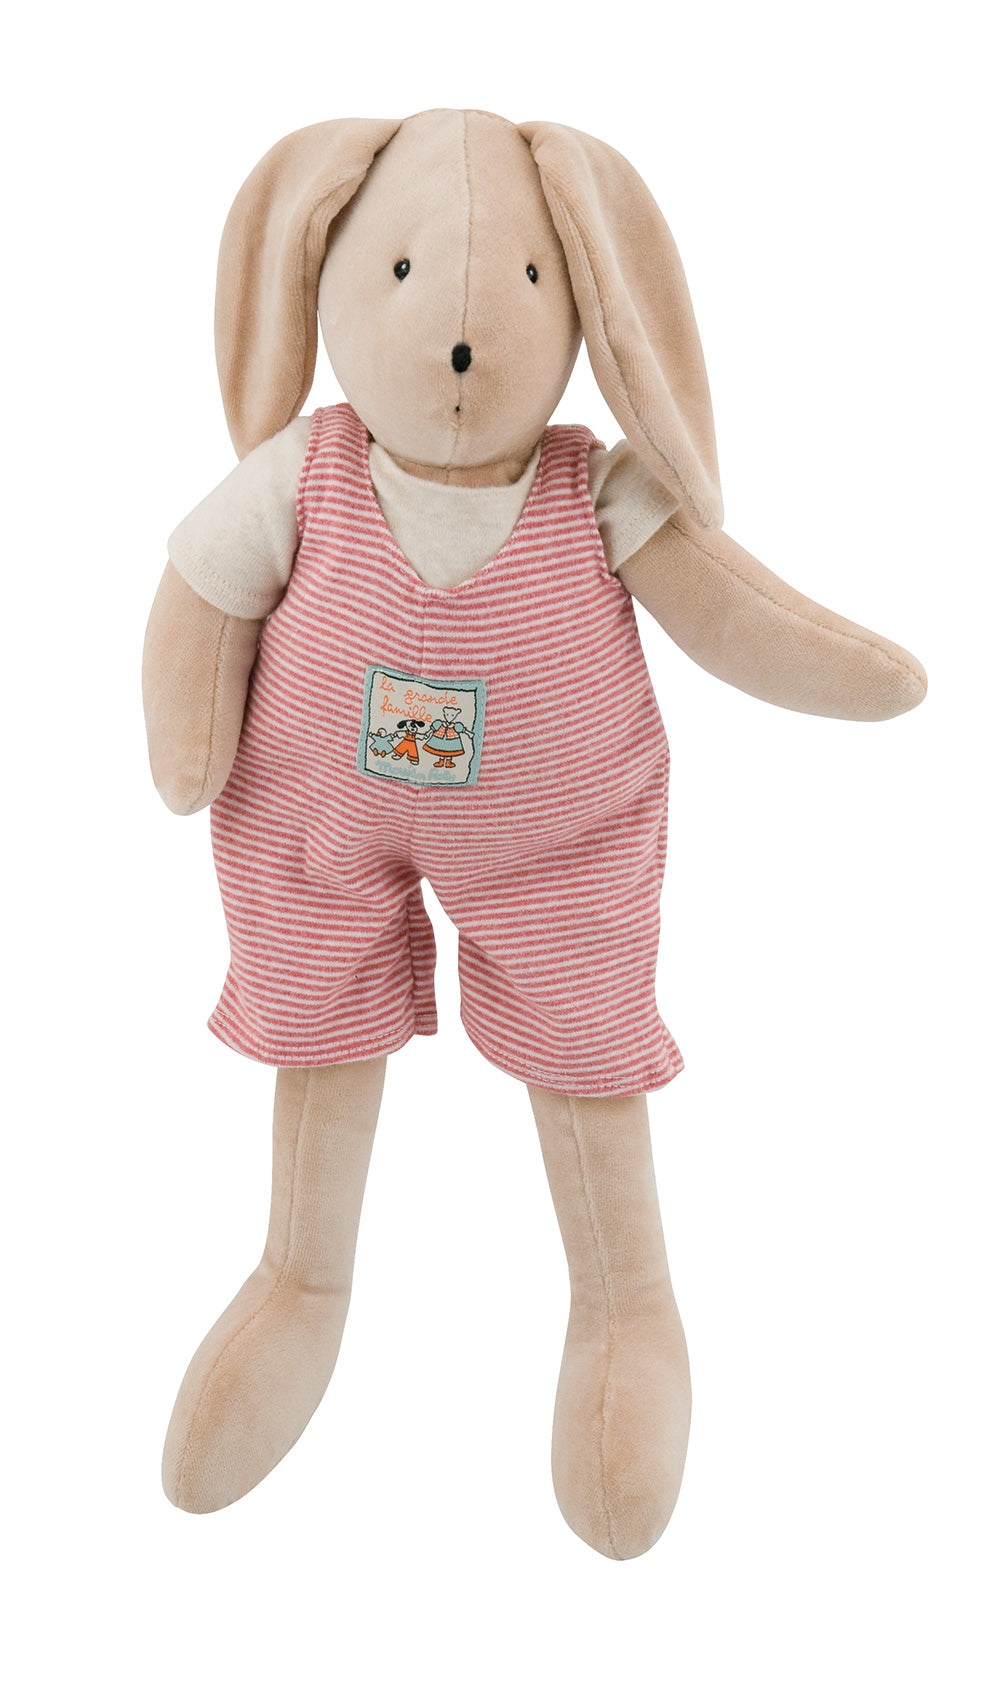 Measuring 50 cm, Sylvain is a soft and cuddly rabbit ready to go to bed in its soft red stripes outfit.   